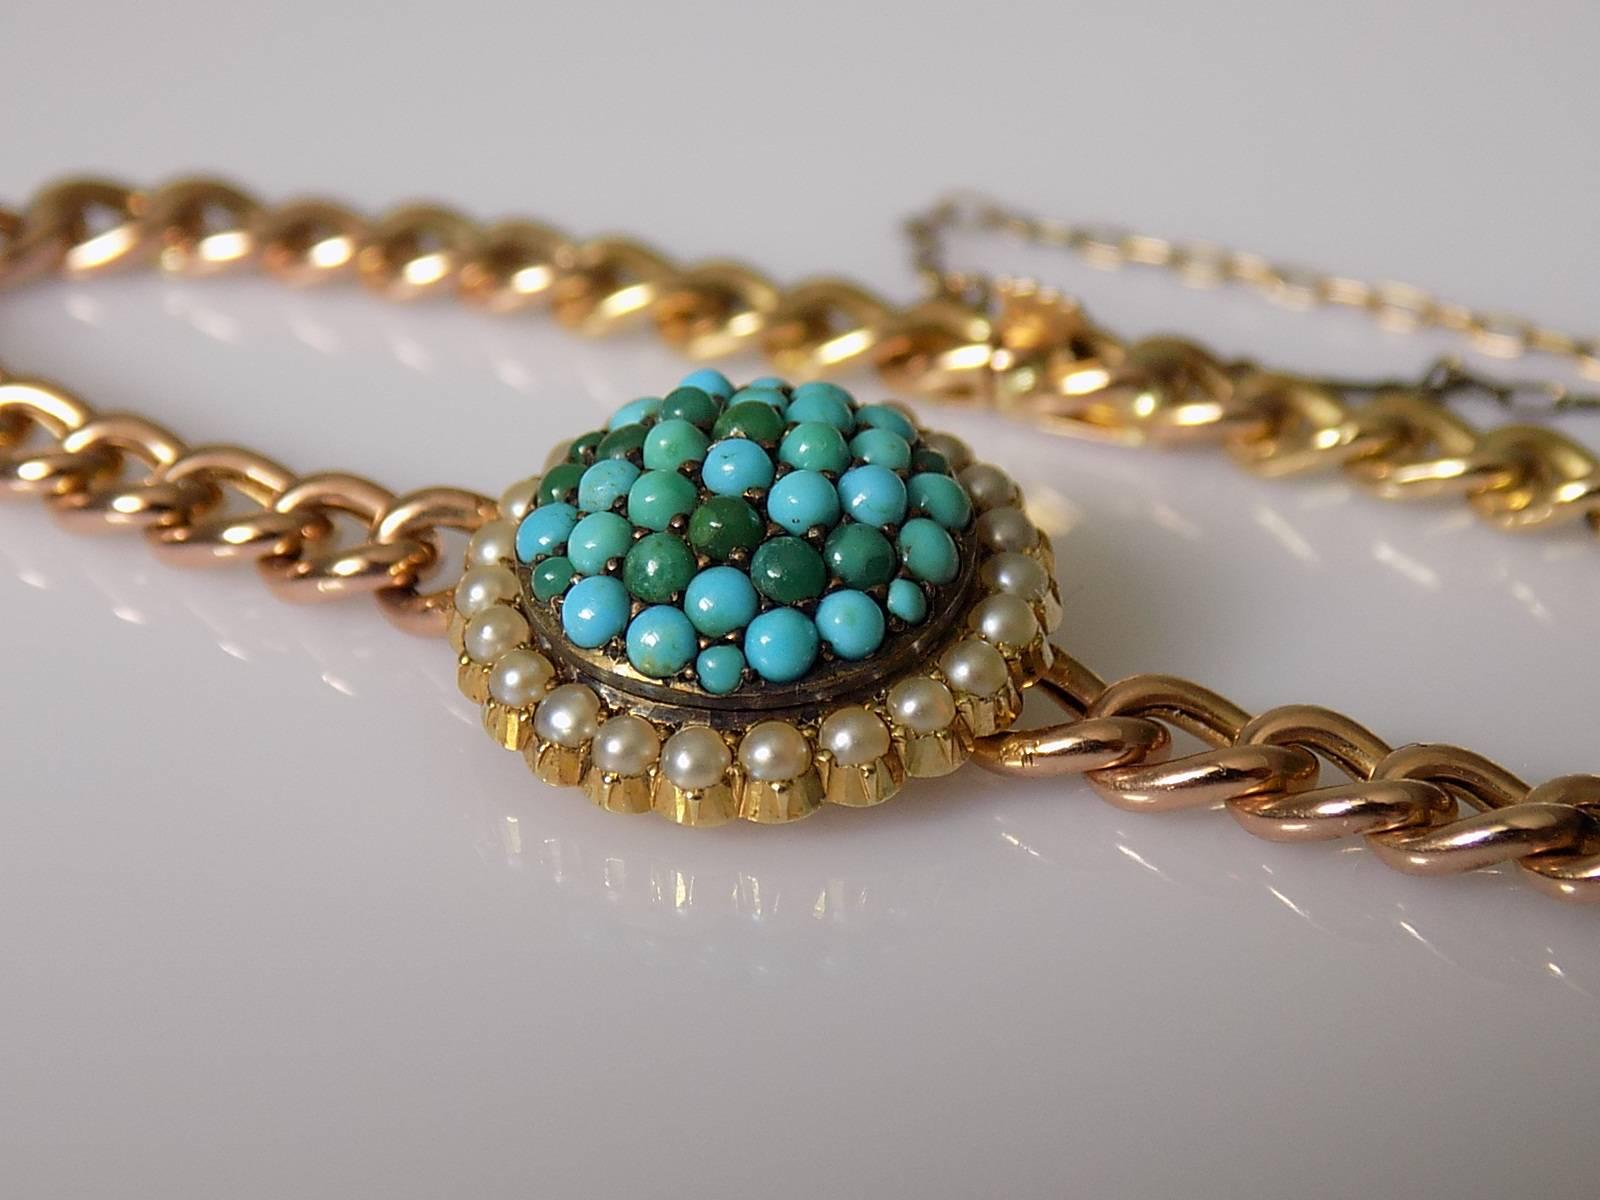 An Unique Antique Victorian 15 Carat Gold bracelet with a Turquoise and Pearl Target detail to the front. Turquoise in Pave setting surrounded by split Seed Pearls. English origin.
Length including clasp 7 1/2